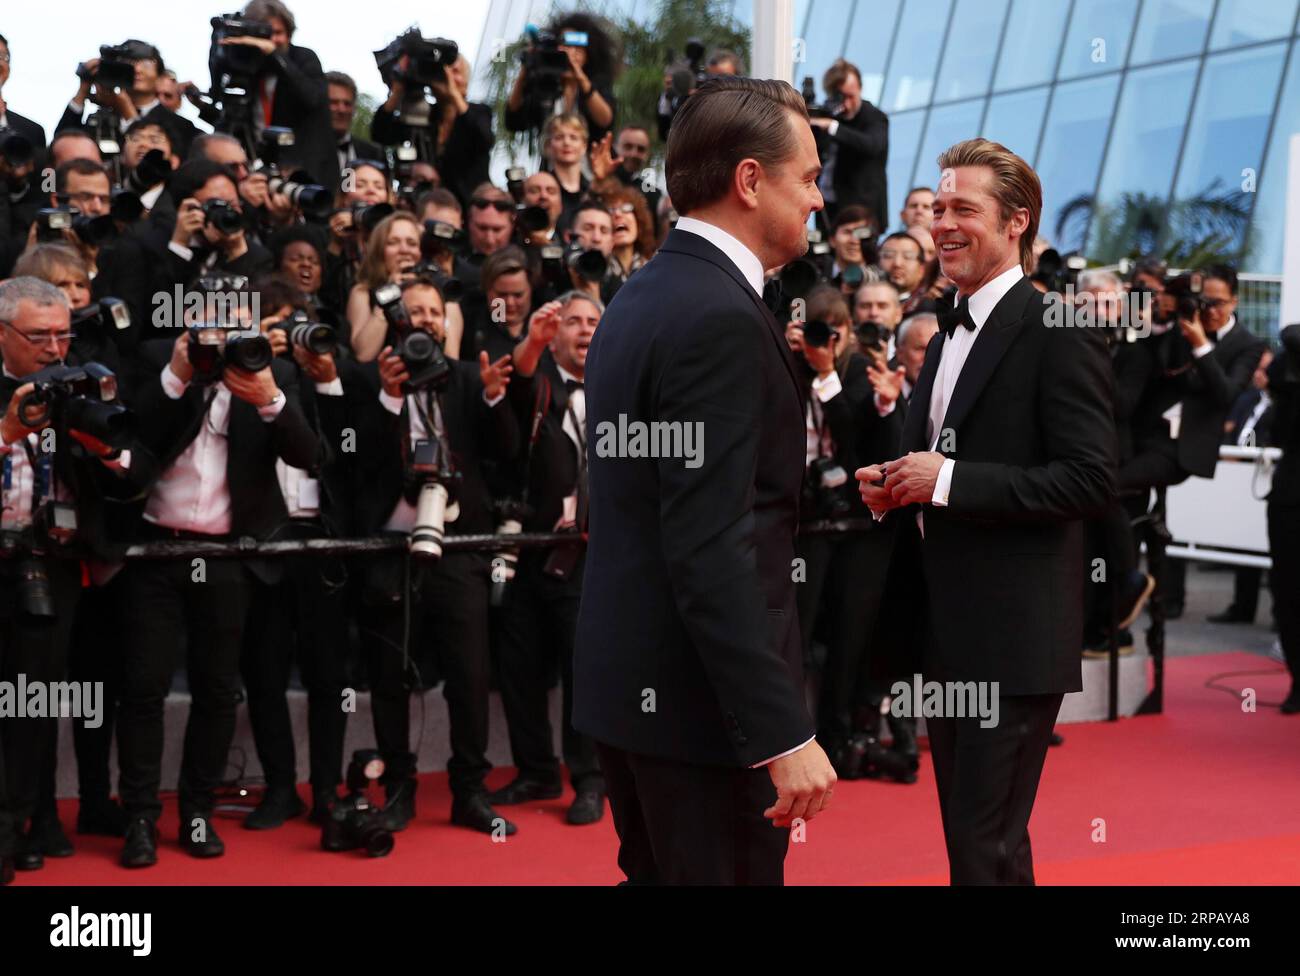 (190522) -- CANNES, May 22, 2019 (Xinhua) -- Actors Leonardo DiCaprio (L) and Brad Pitt attend the premiere of Quentin Tarantino-directed film Once Upon a Time in Hollywood during the 72nd Cannes Film Festival in Cannes, France, May 21, 2019. Once Upon a Time in Hollywood will compete for the Palme d Or with other 20 films. (Xinhua/Gao Jing) FRANCE-CANNES-FILM ONCE UPON A TIME IN HOLLYWOOD -PREMIERE PUBLICATIONxNOTxINxCHN Stock Photo